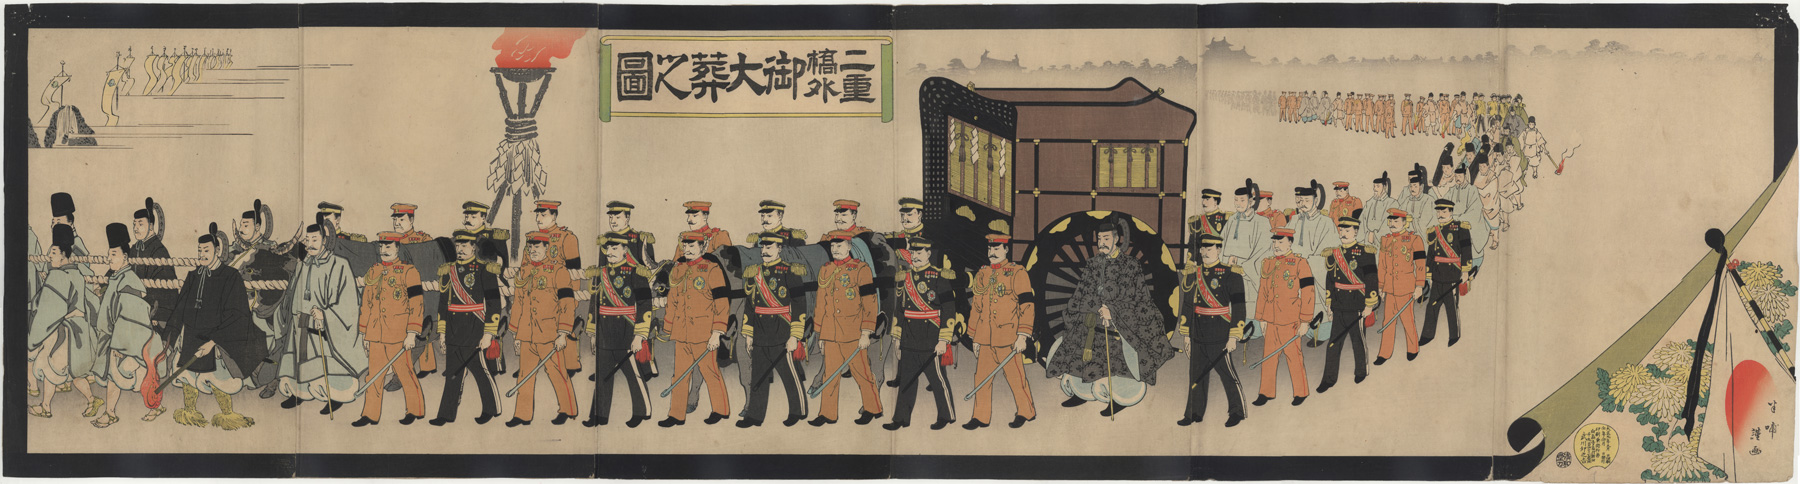 Illustration of His Imperial Majesty's Funeral Outside Nijūbashi